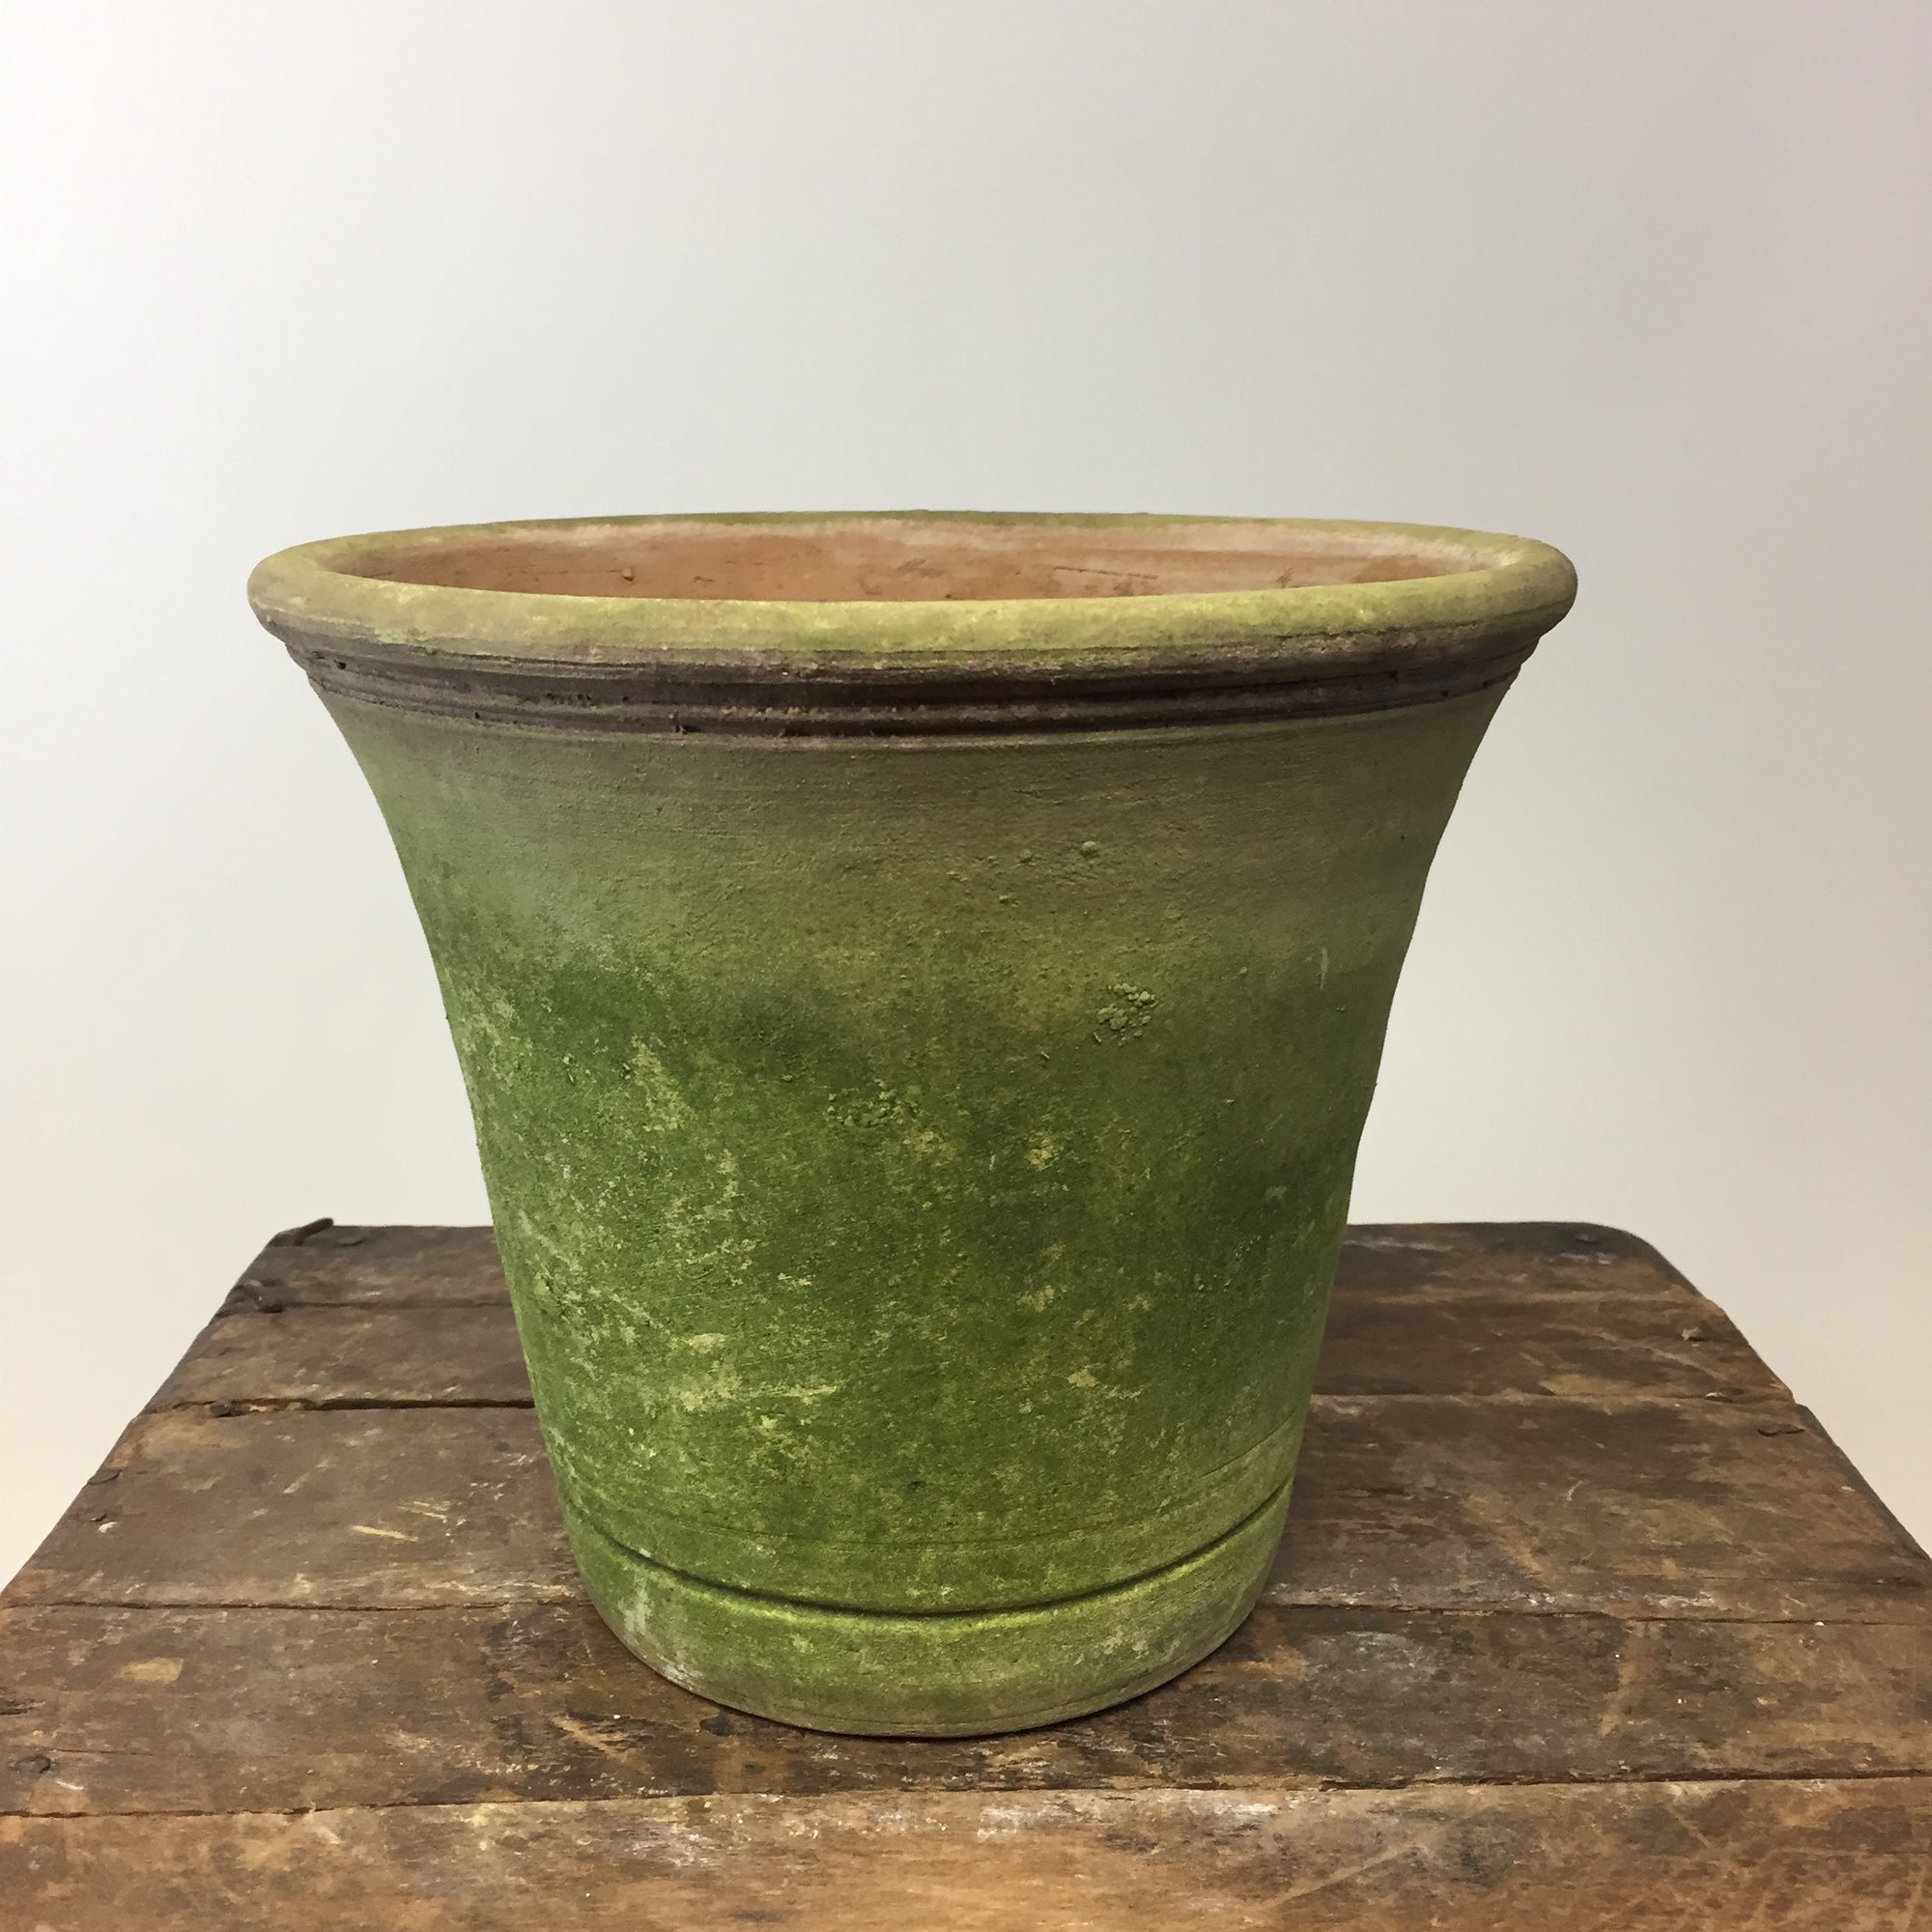 English Nursery Terracotta Planter with Aged Moss. 6"